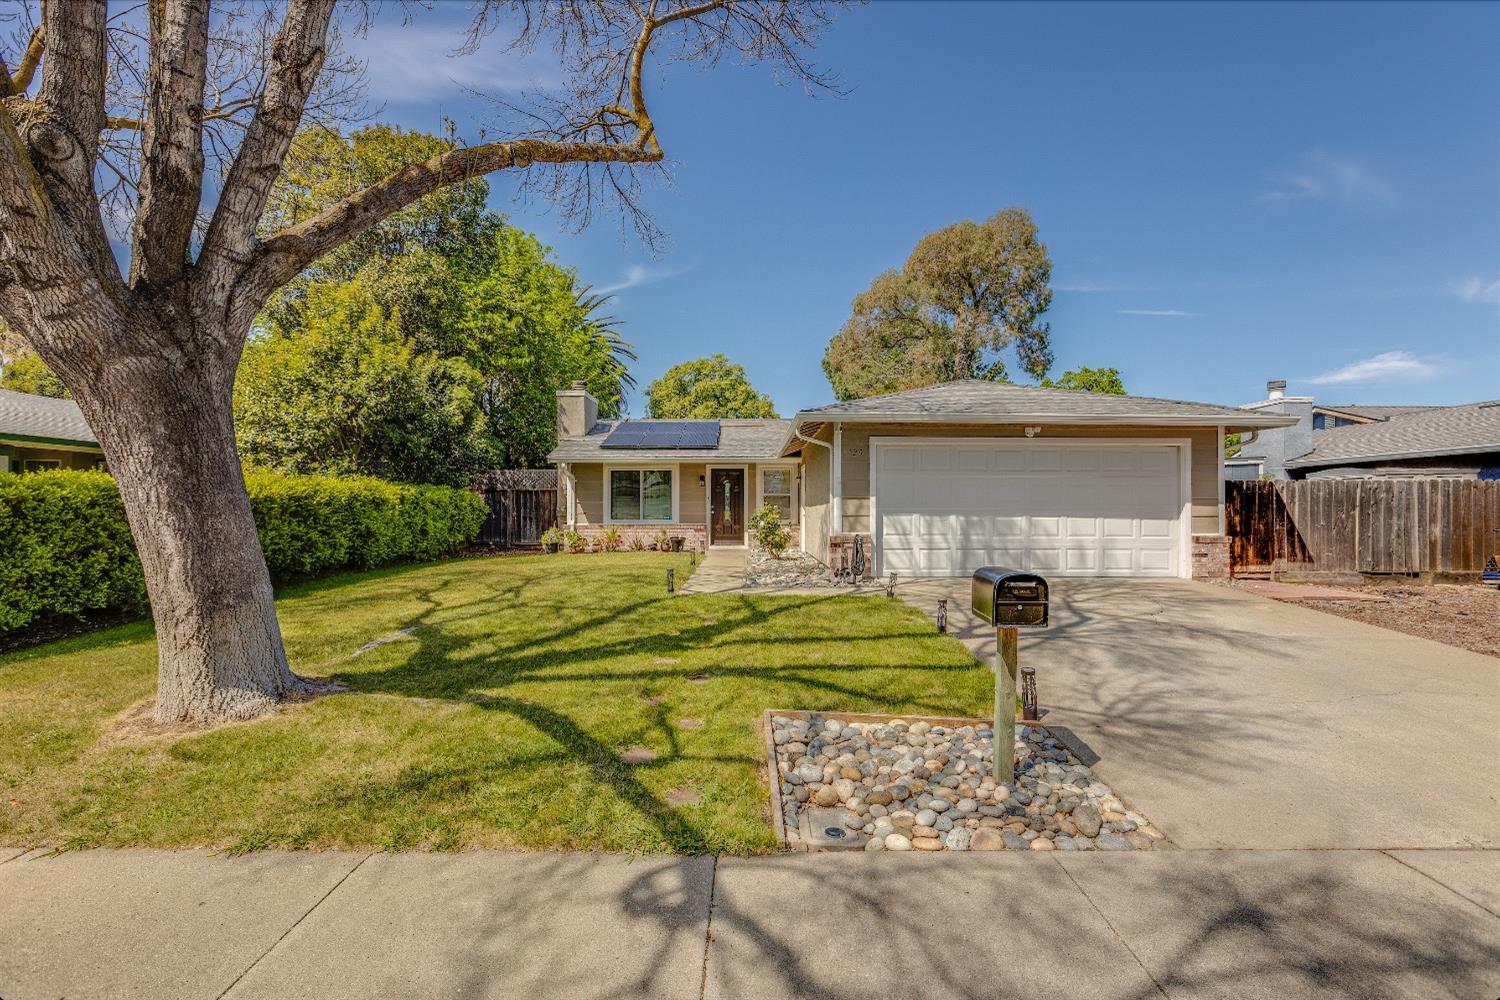 Photo of 1125 Sultana Dr in Tracy, CA